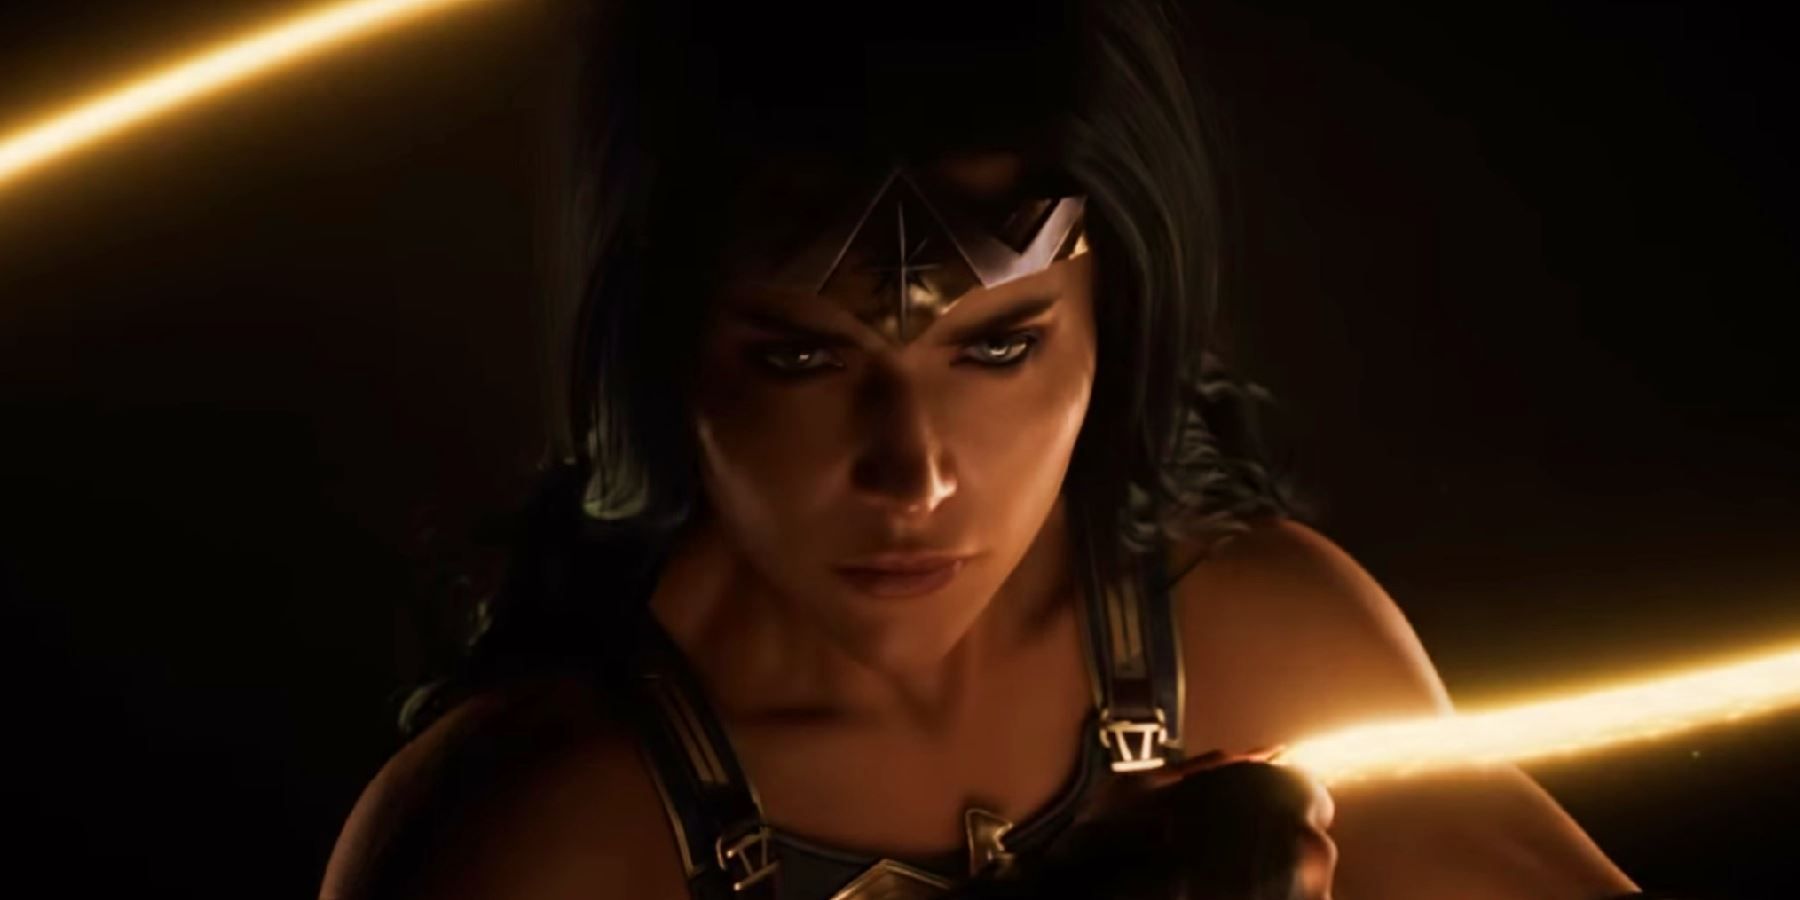 Wonder Woman holding her lasso in the new game.